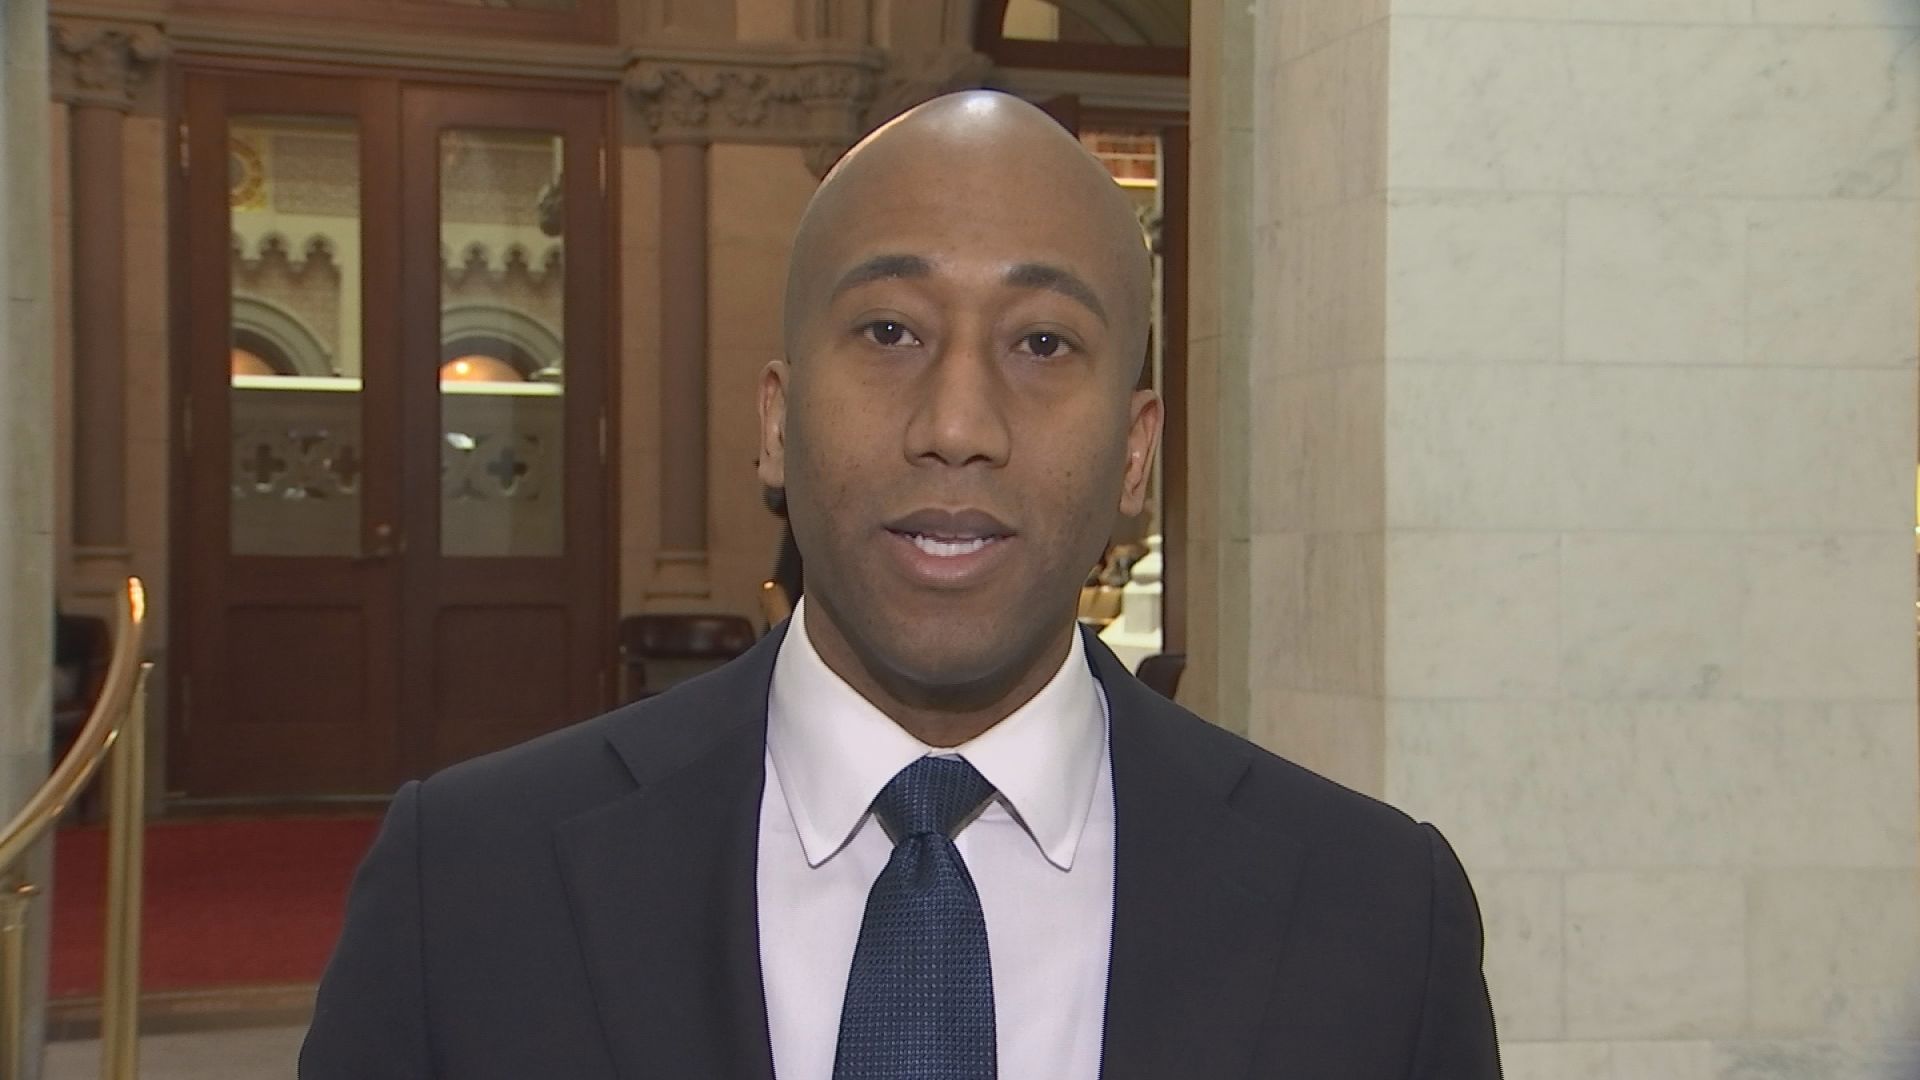 Assemblyman Vanel on Passage of New State Budget